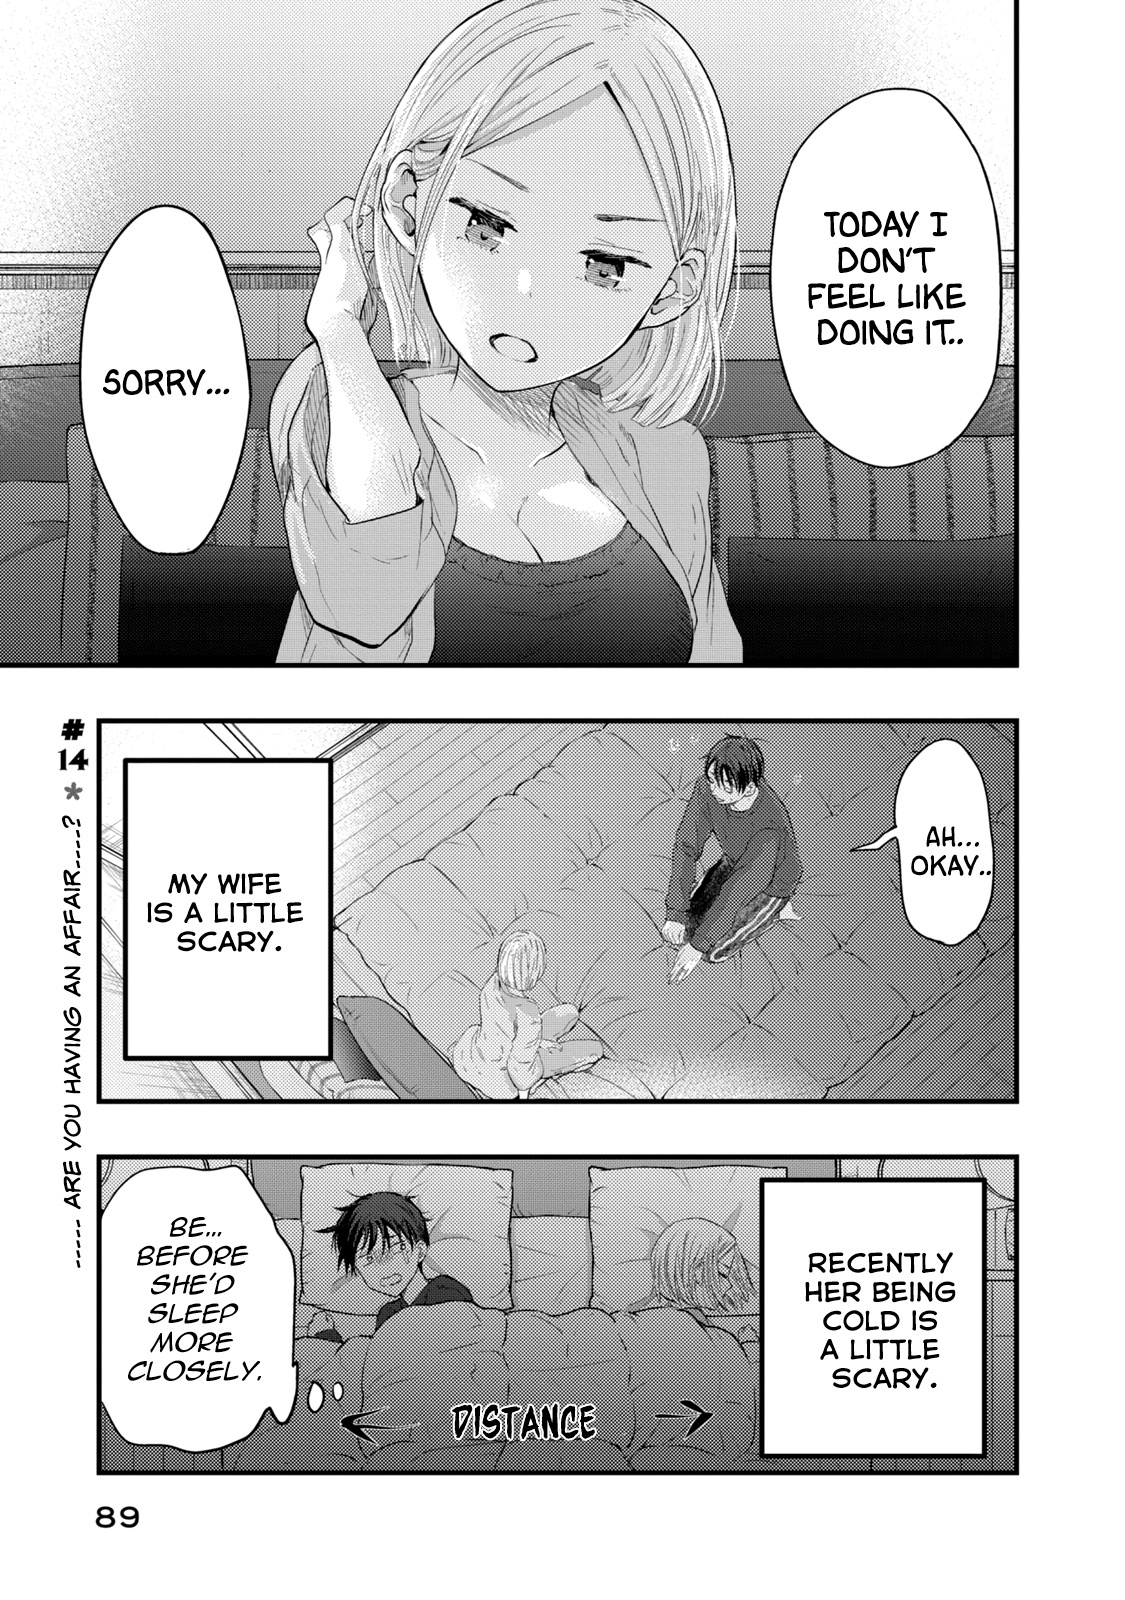 My Wife Is A Little Scary (Serialization) Vol.2 Chapter 14: Are You Having An Affair...? - Picture 1